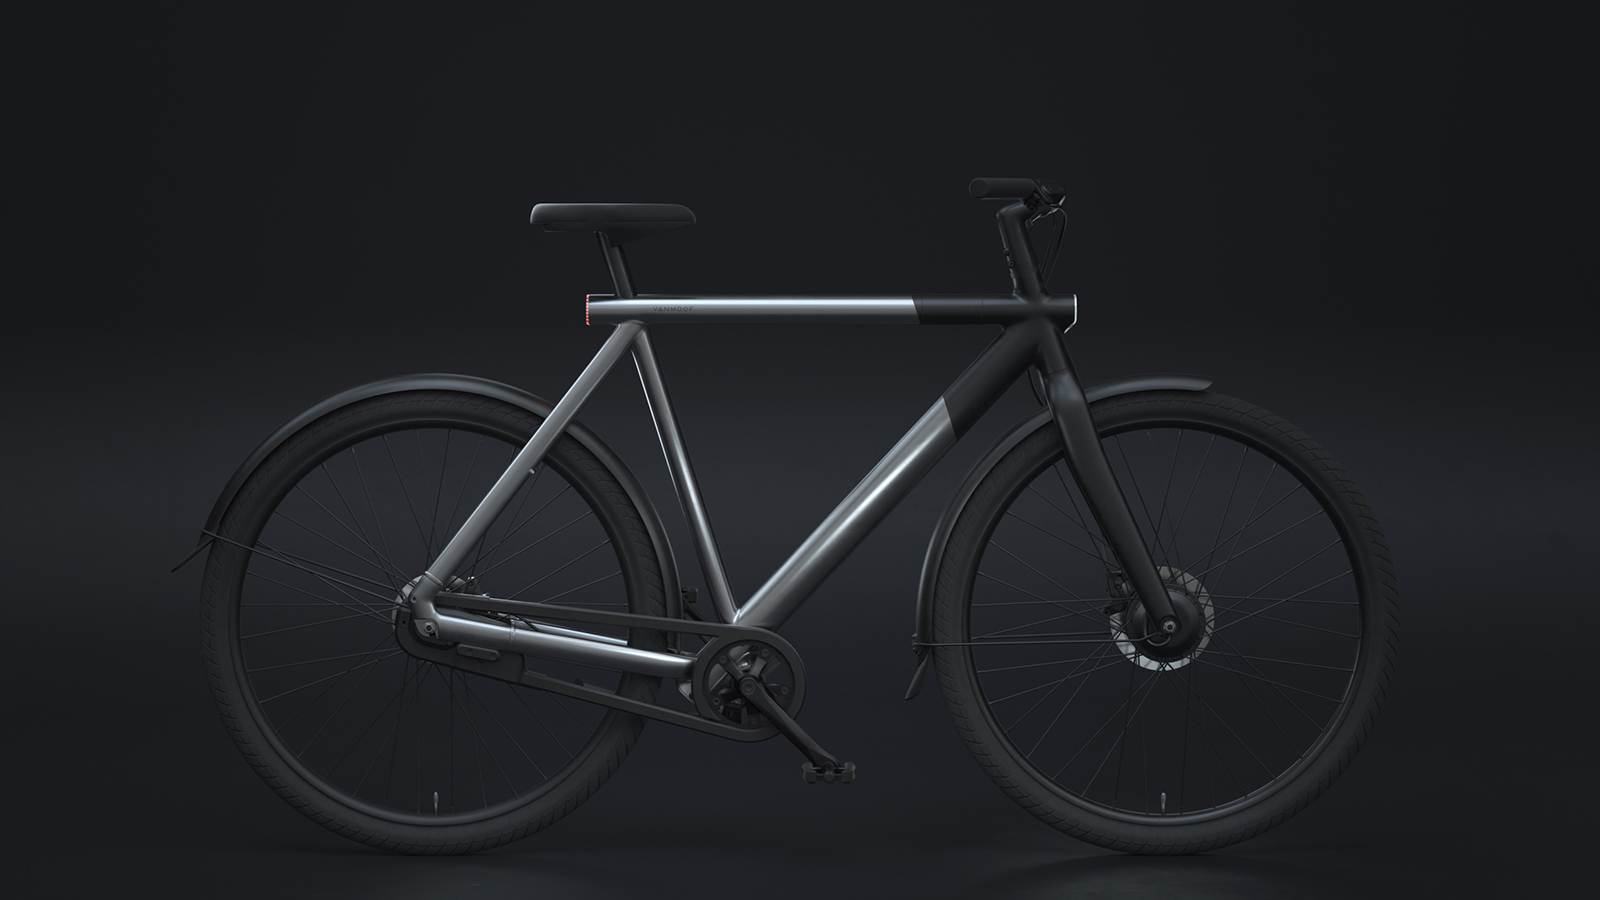 Vanmoof The limited-edition S3 Aluminum